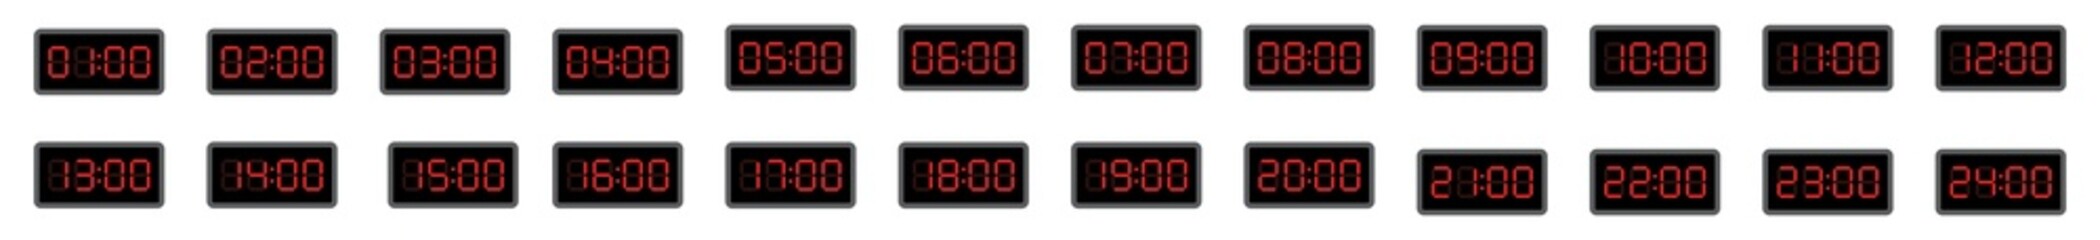 Time clocks icon in 24 hour. Vector illustration. 24 hour format square digital clock vector icon.